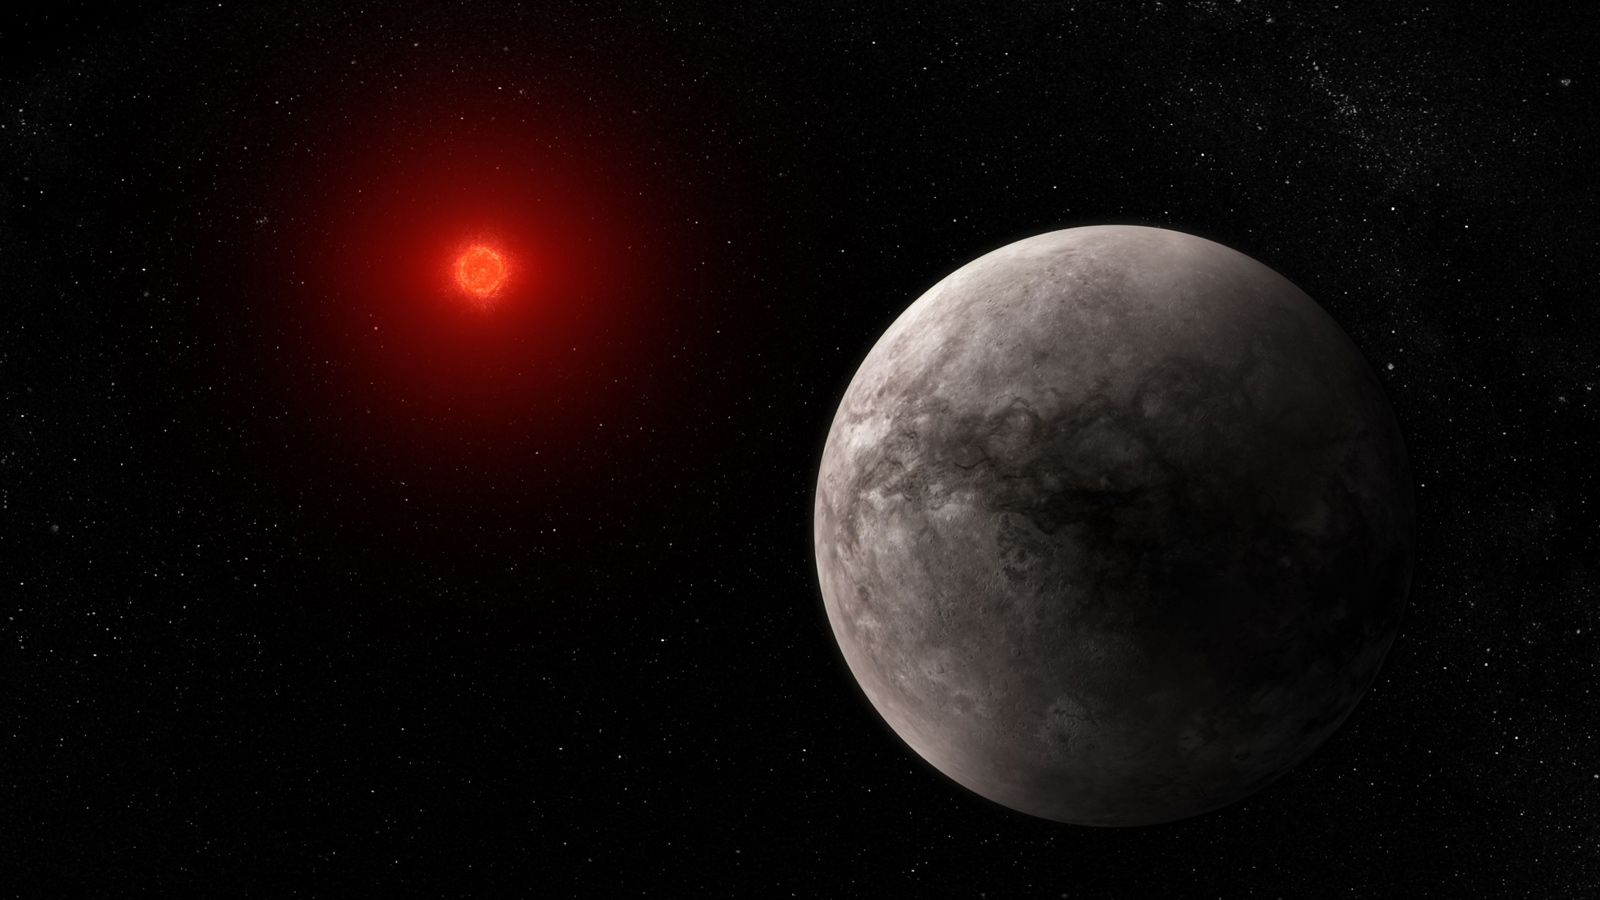 Illustration of a rocky planet and its red dwarf star on a black background. The planet is large, in the foreground on the lower right and the star is smaller, in the background at the upper left. The planet is gray. The star has a bright orange-red glow. This illustration shows what the hot rocky exoplanet TRAPPIST-1 b could look like based on this work. 